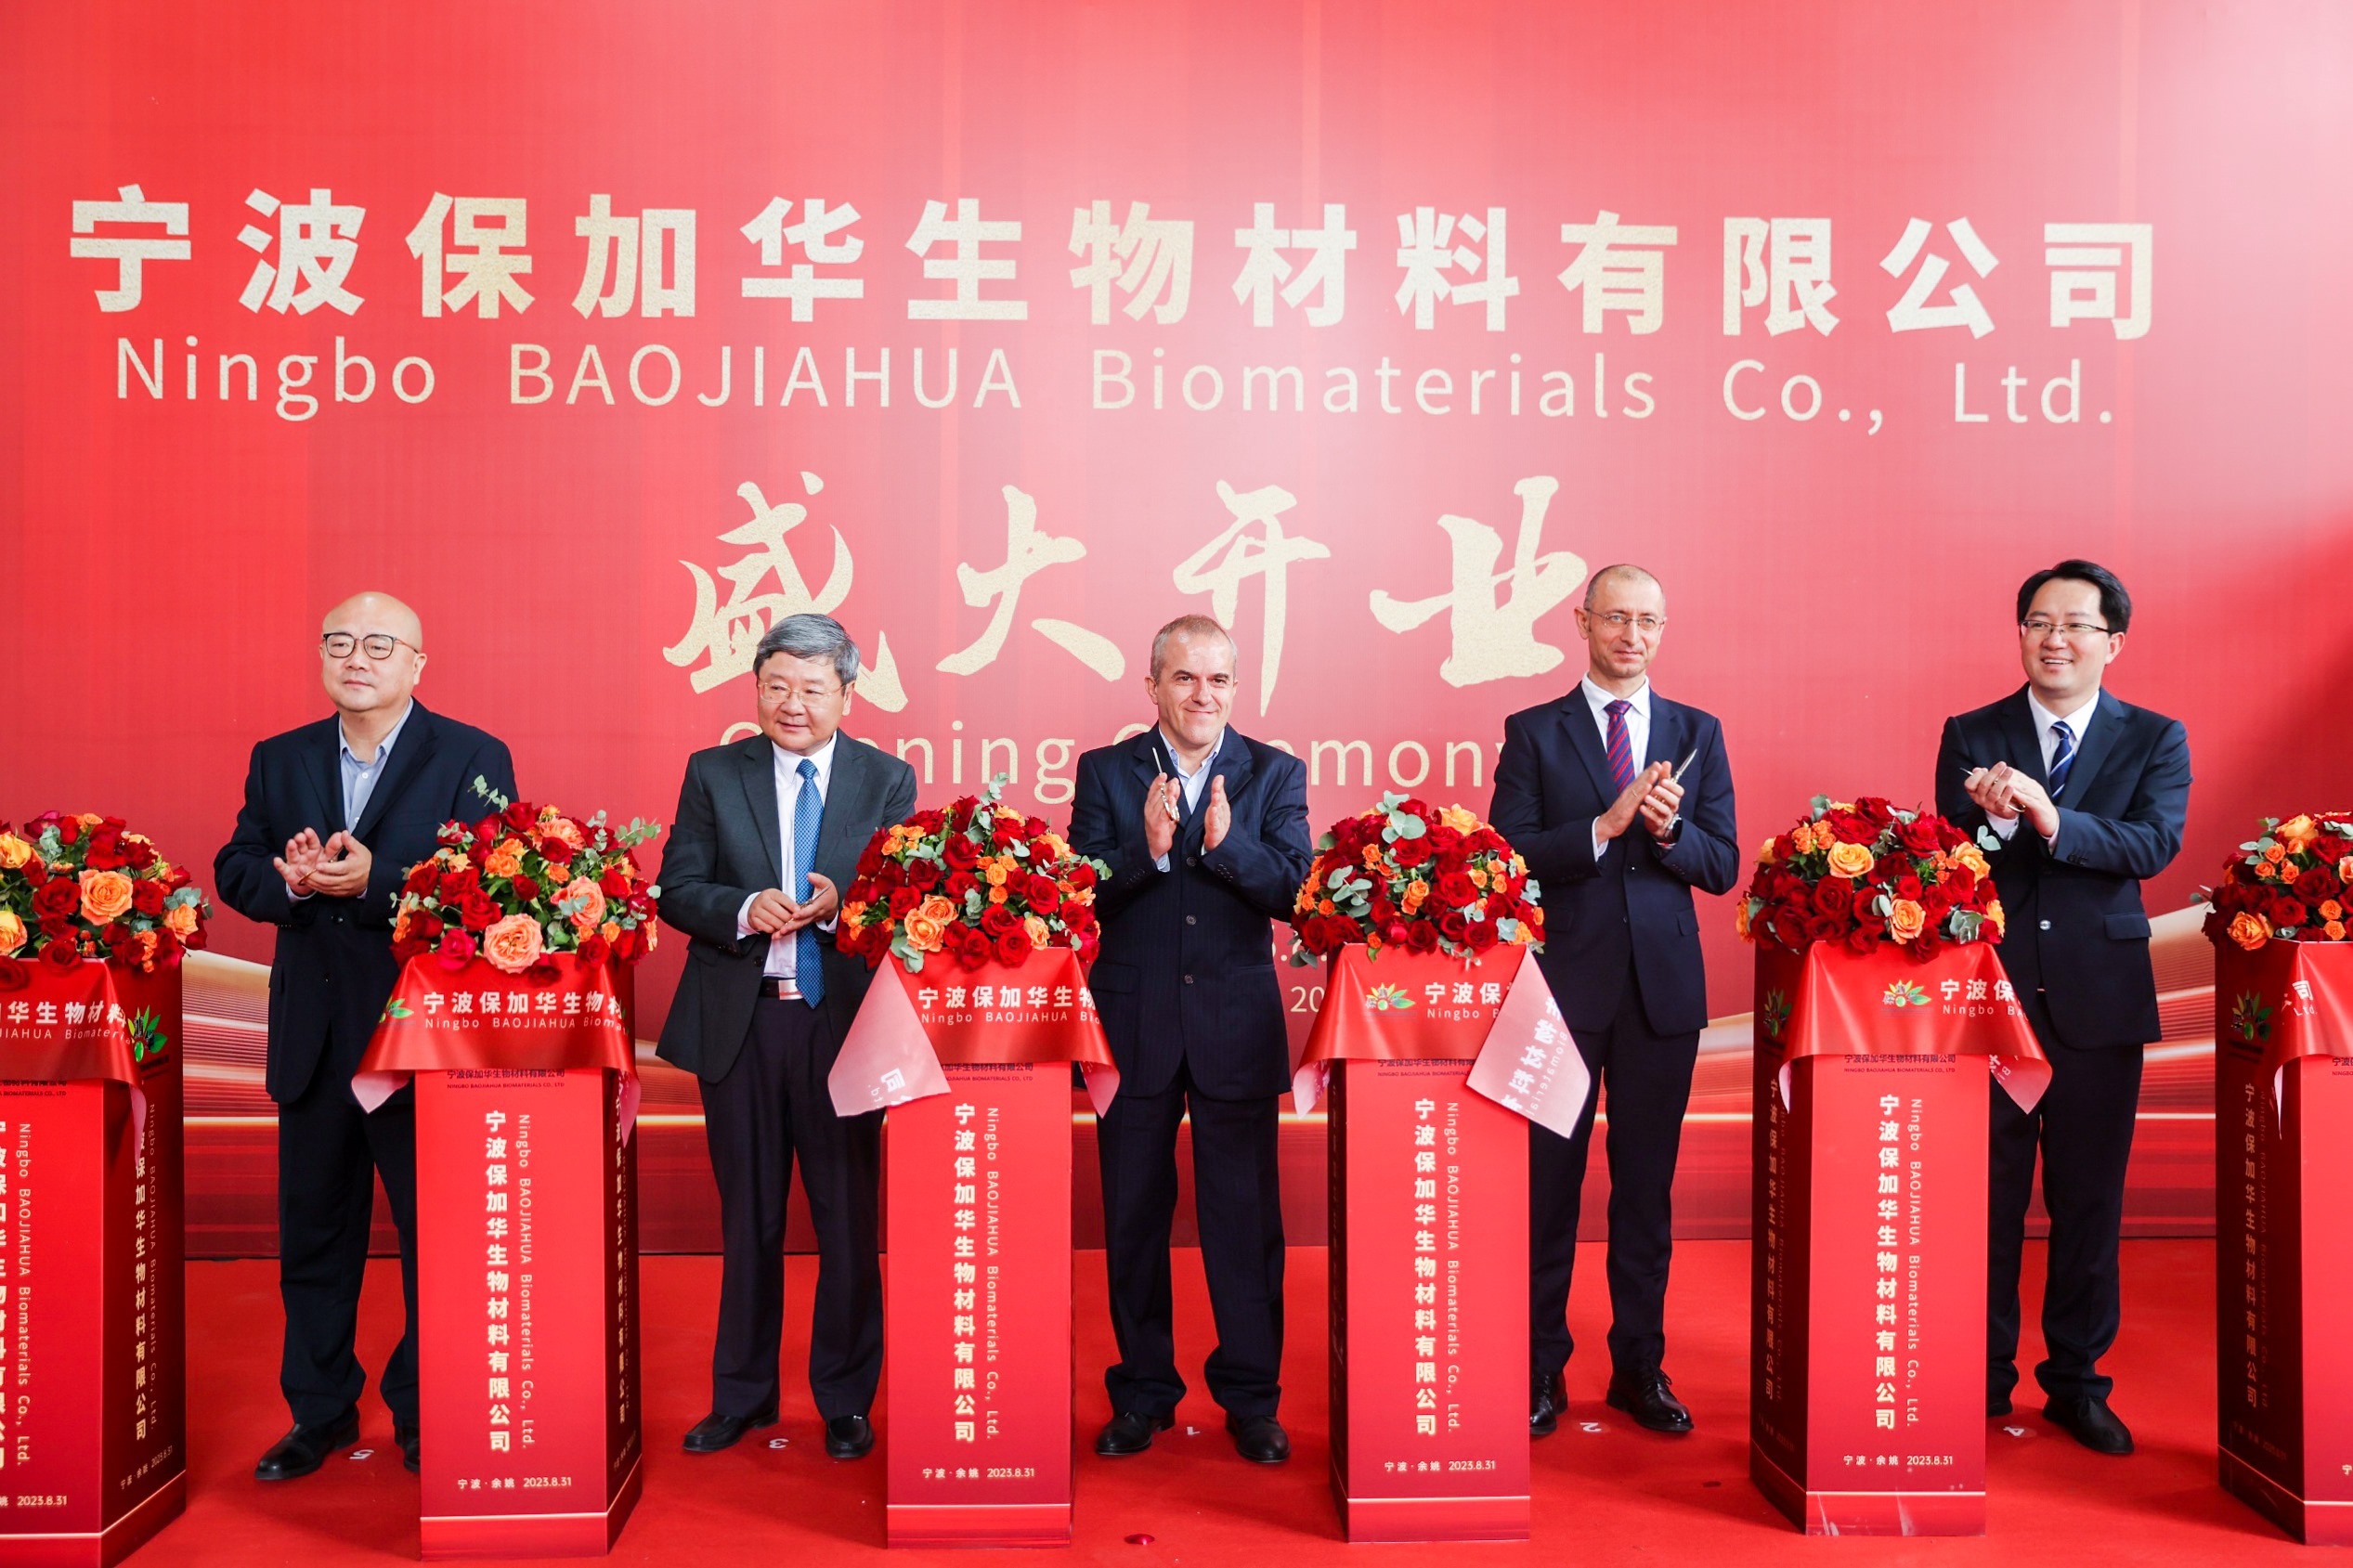 Inauguration ceremony of the first wholly foreign-owned (Bulgarian) enterprise in the Yangtze River Delta